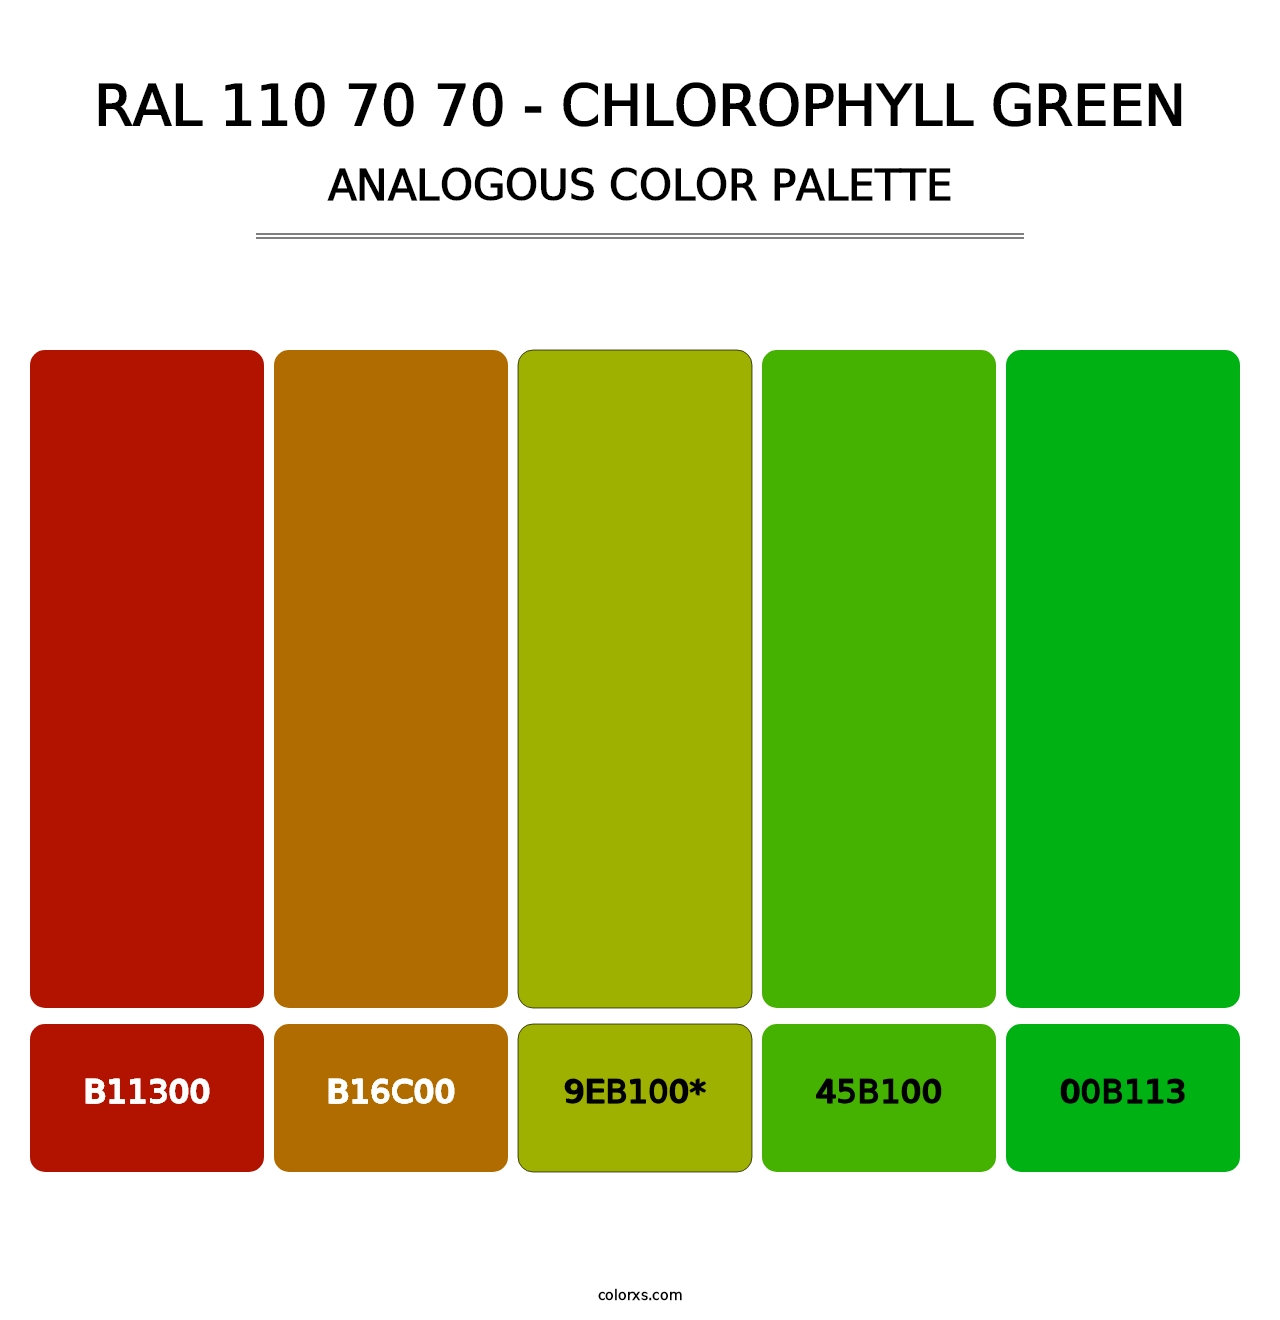 RAL 110 70 70 - Chlorophyll Green - Analogous Color Palette